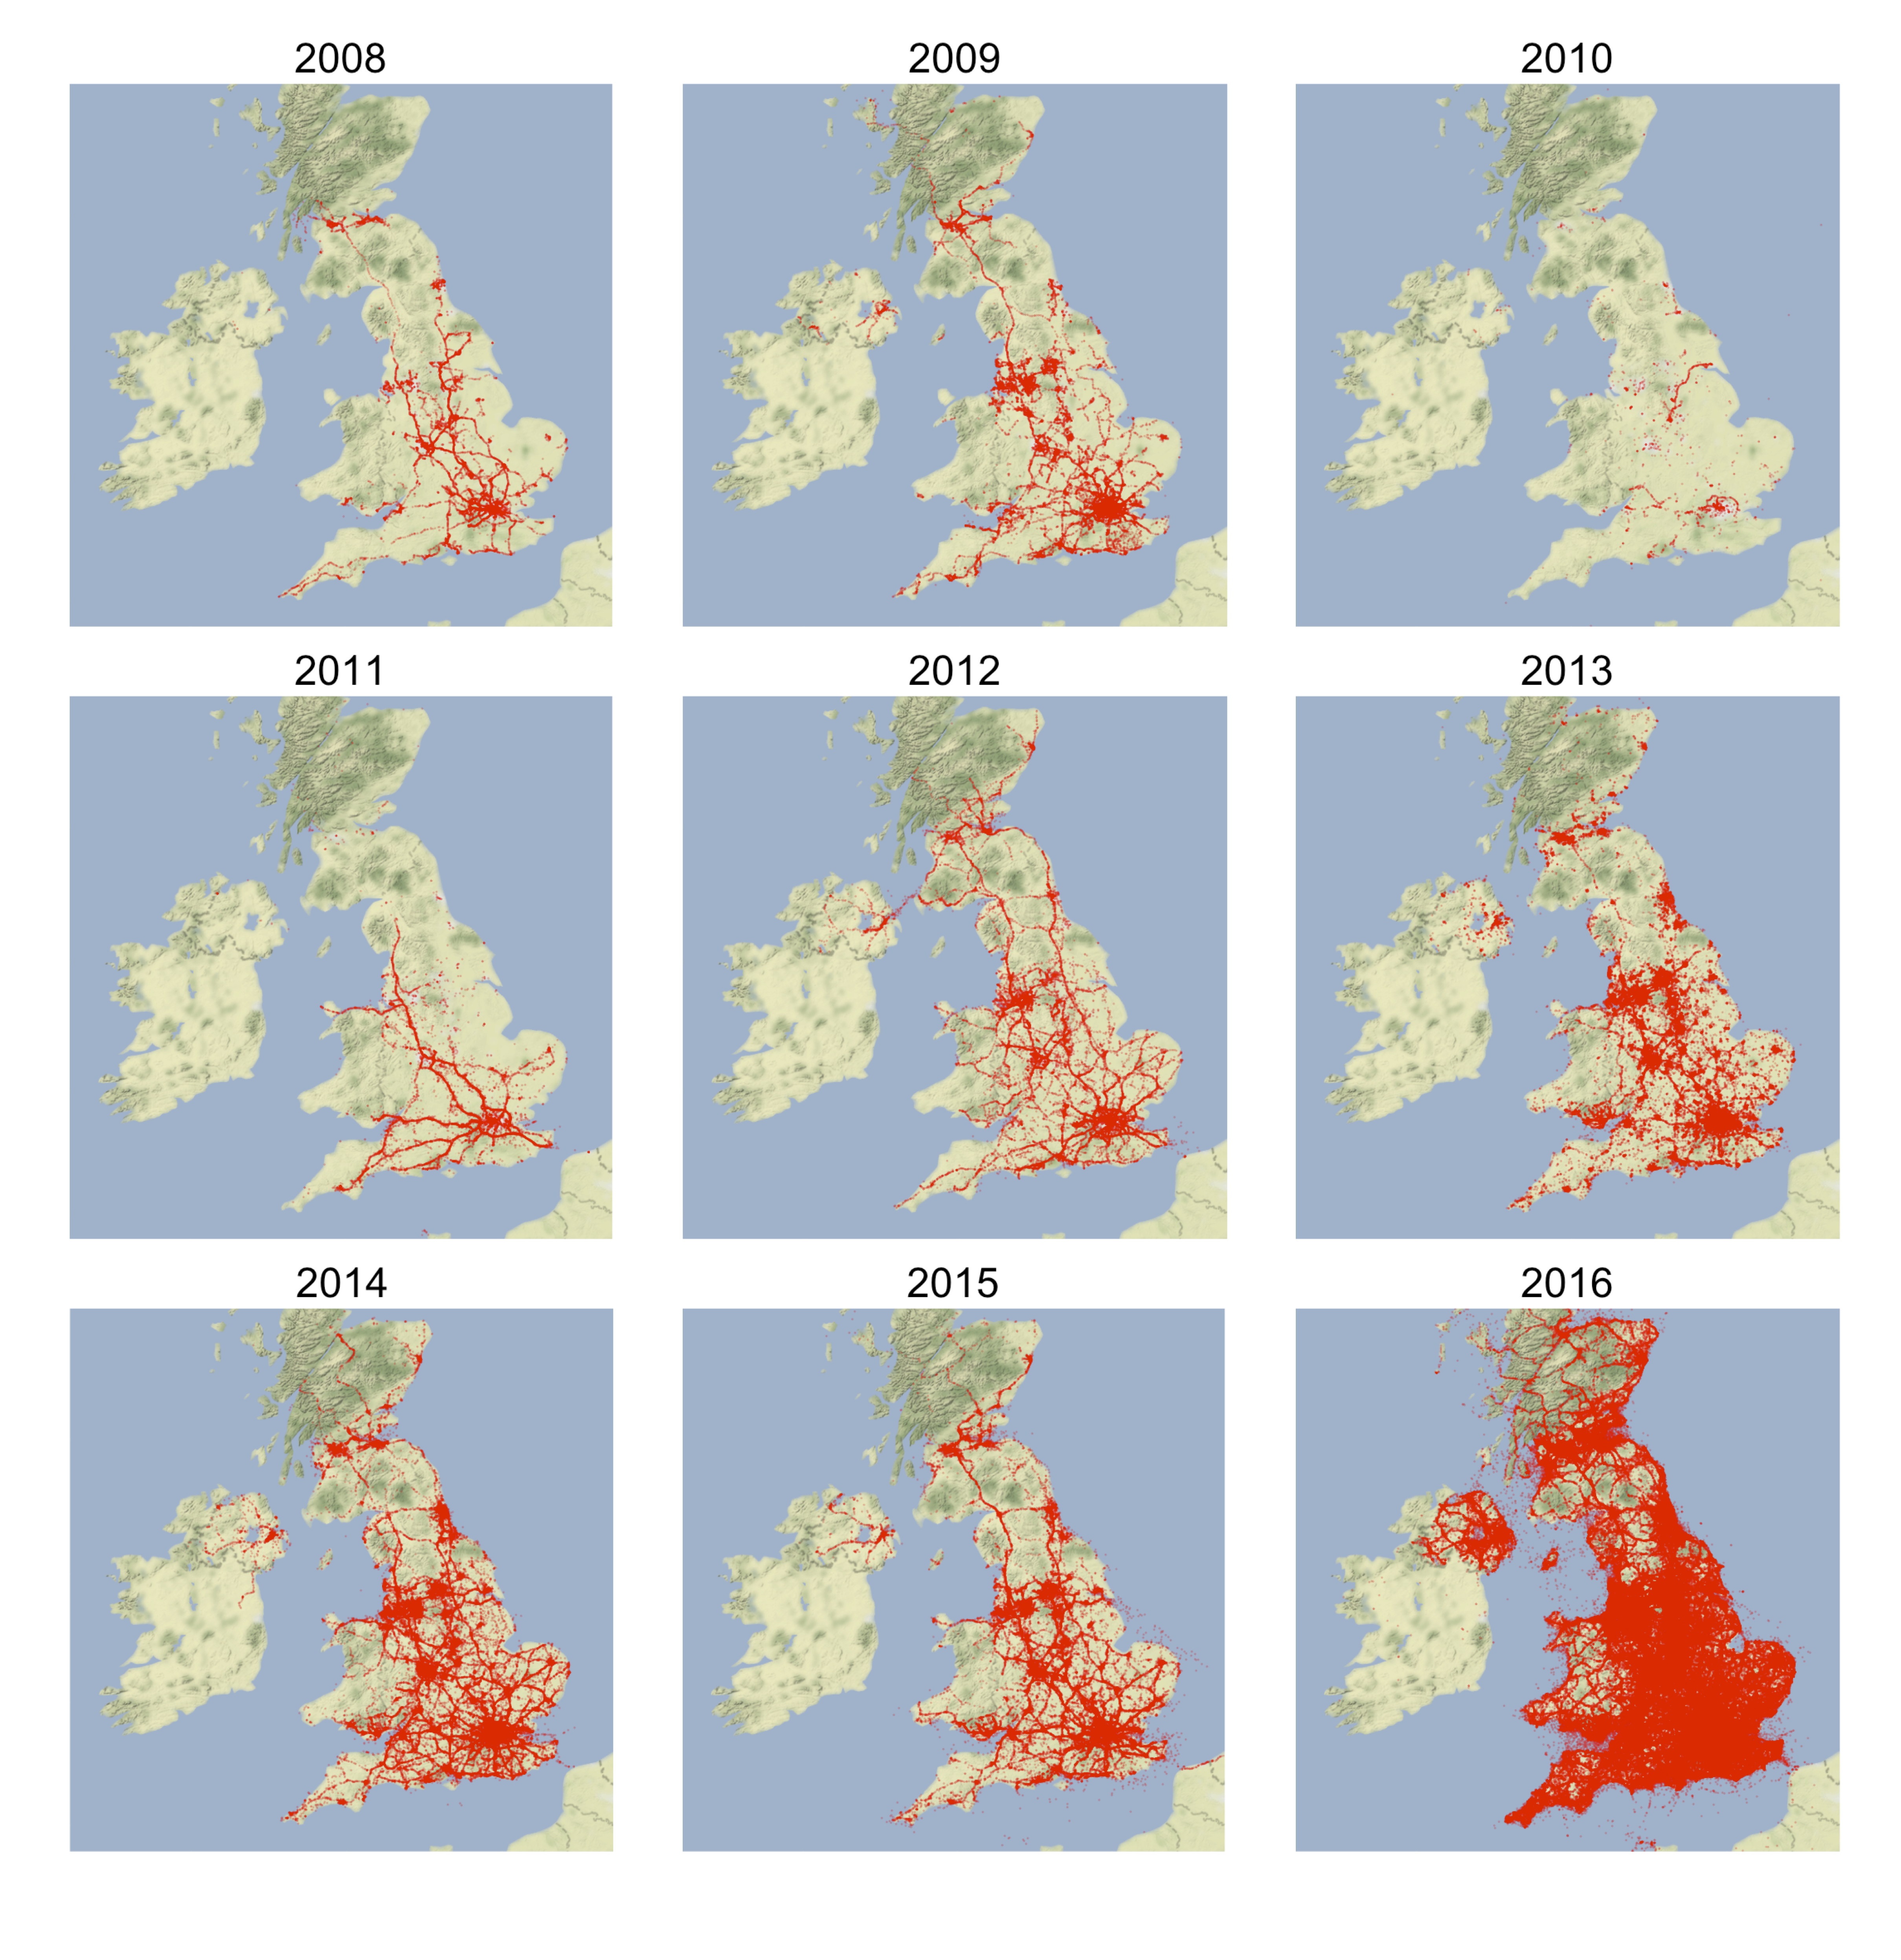 Maps showing the position of cell-towers by year of entry into OpenCellID. Up to  2015 new cell towers are primarily located on main UK road and rail networks whilst in 2016 there are many more and more uniformly spread.